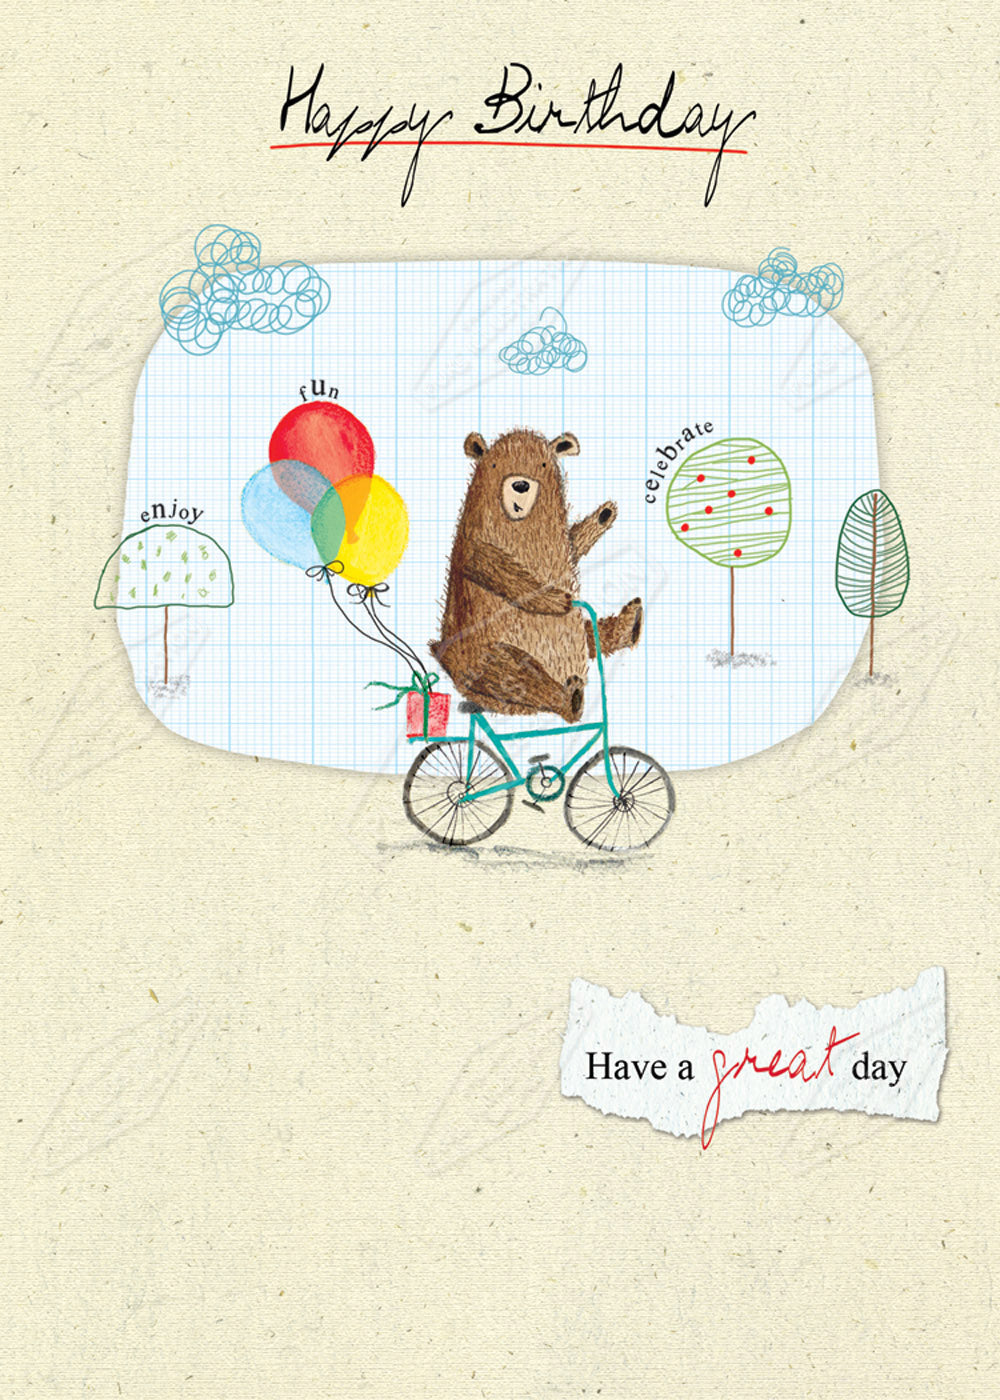 Dad Birthday Bear Greeting Card Design by Cory Reid for Pure Art Licensing & Surface Design Studio